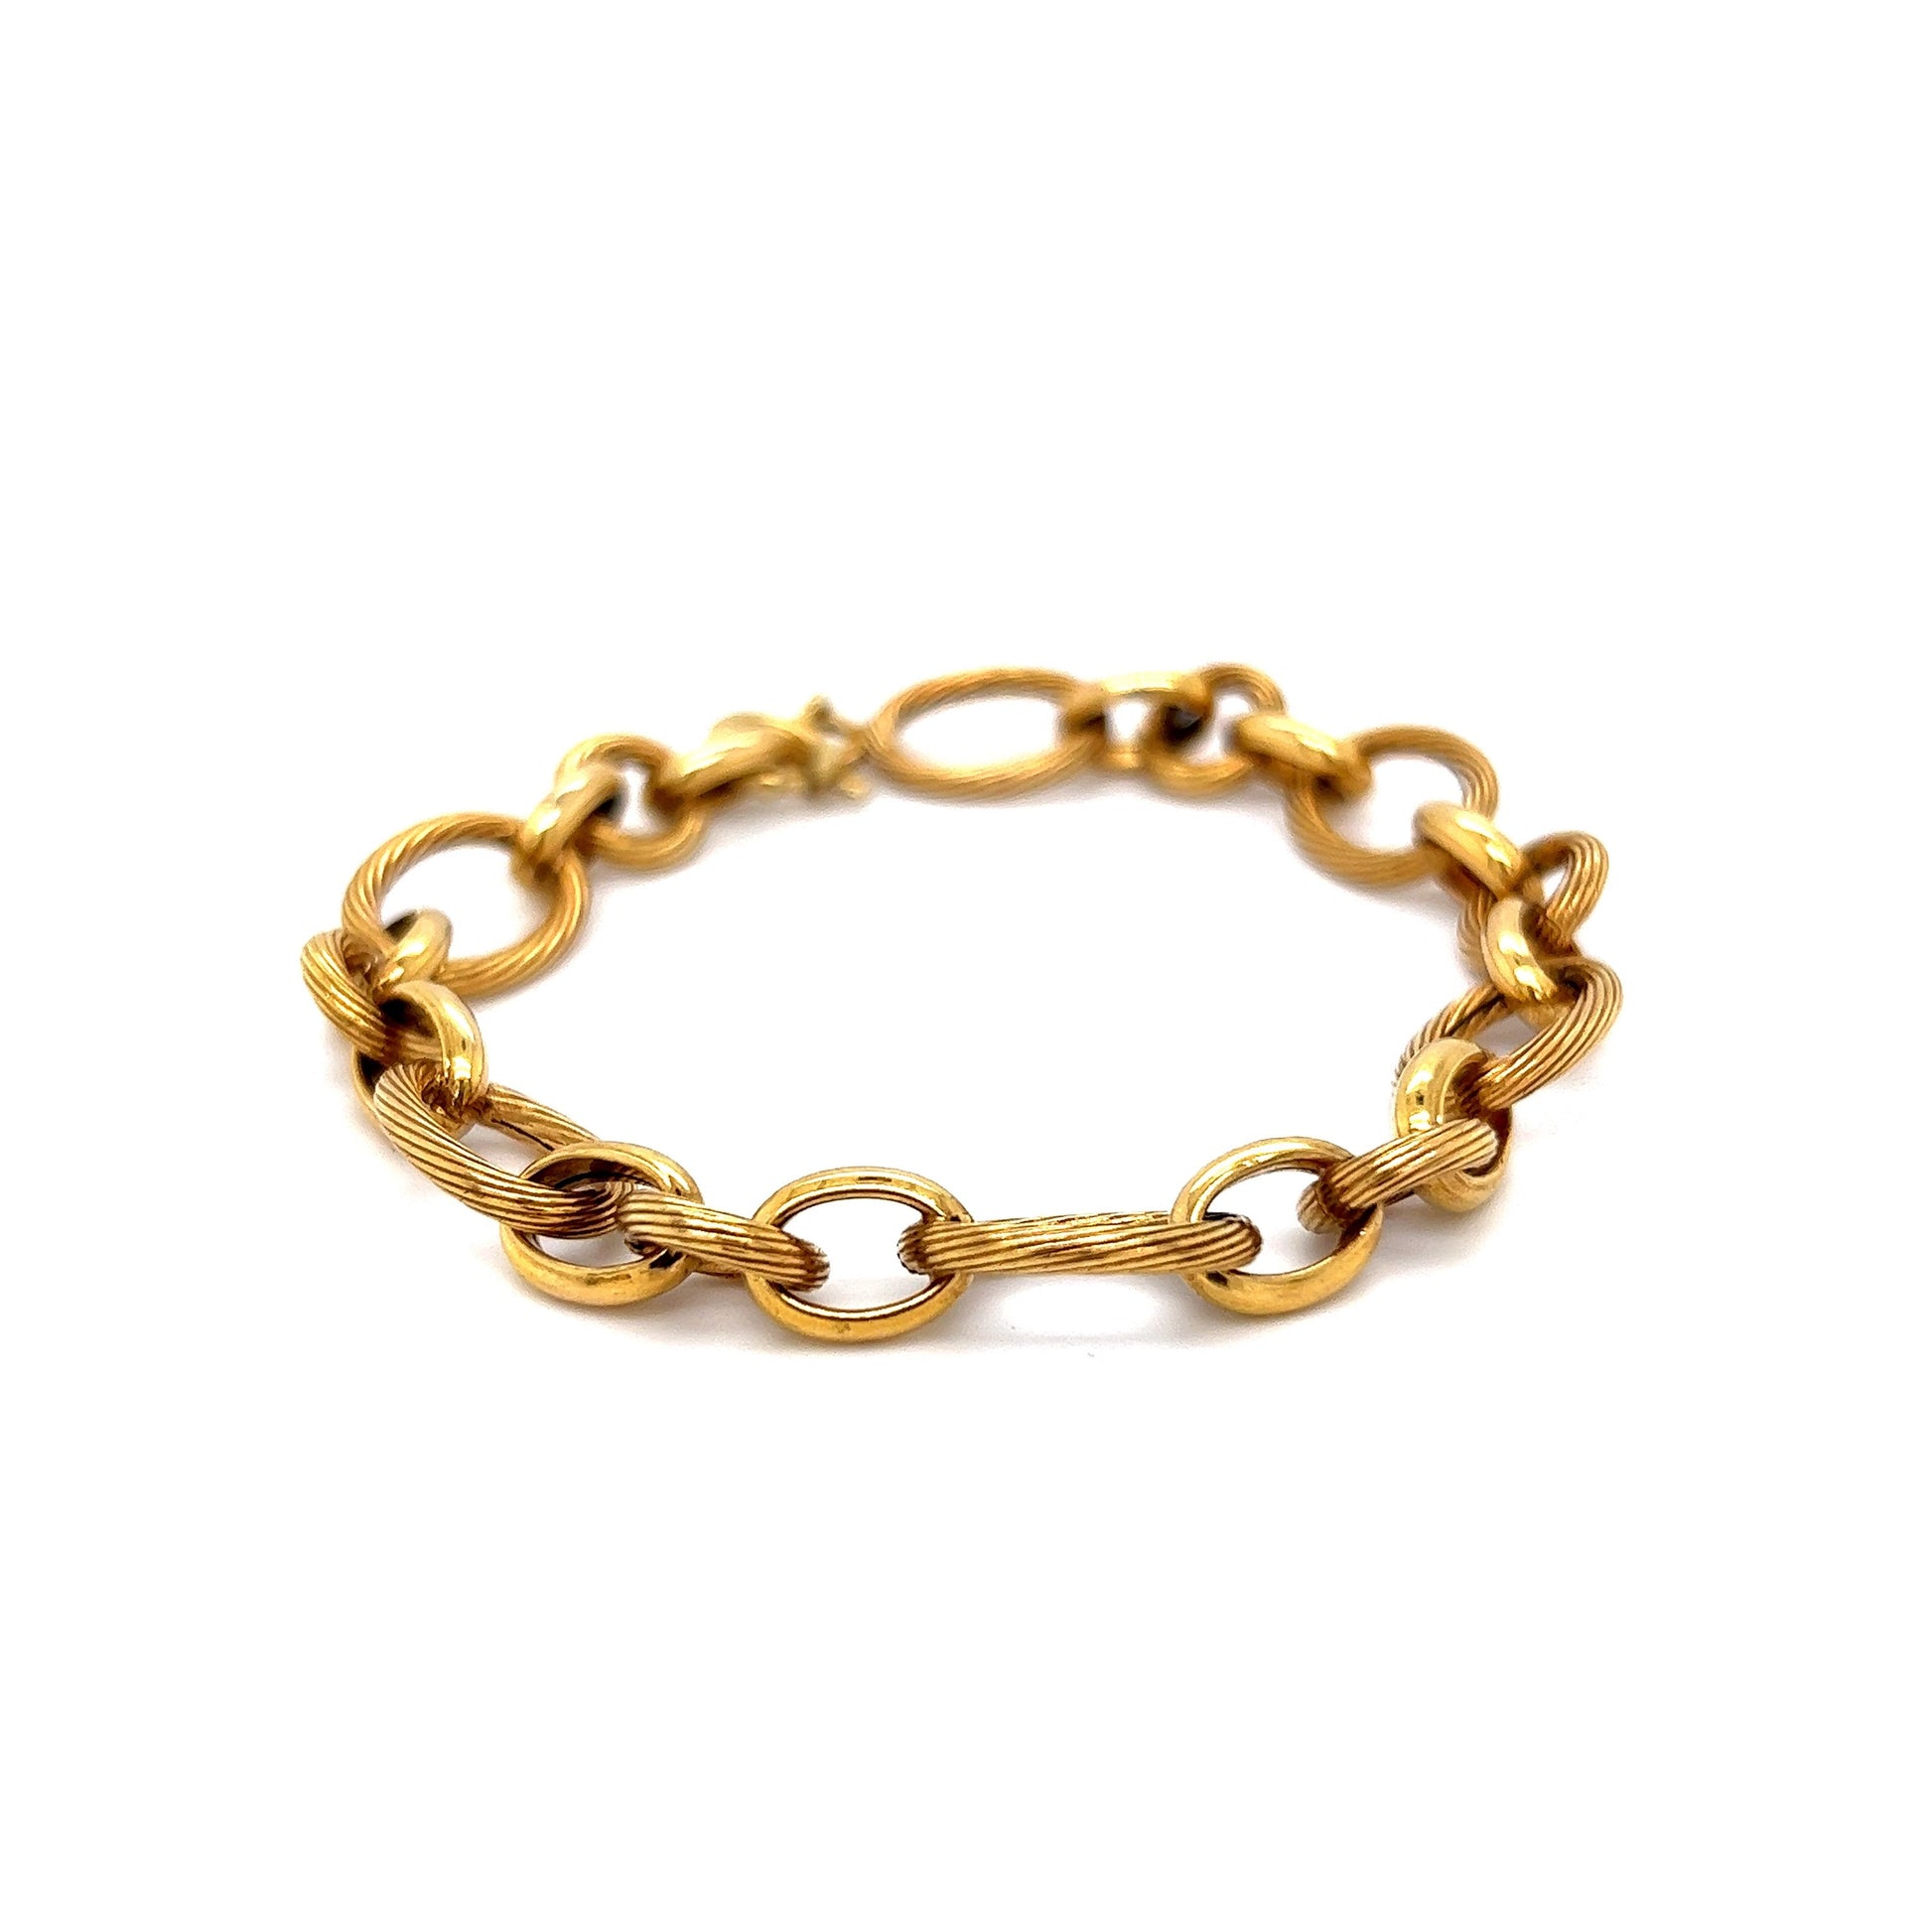 Textured Oval & Round Link Bracelet in 14k Yellow Gold - Filigree